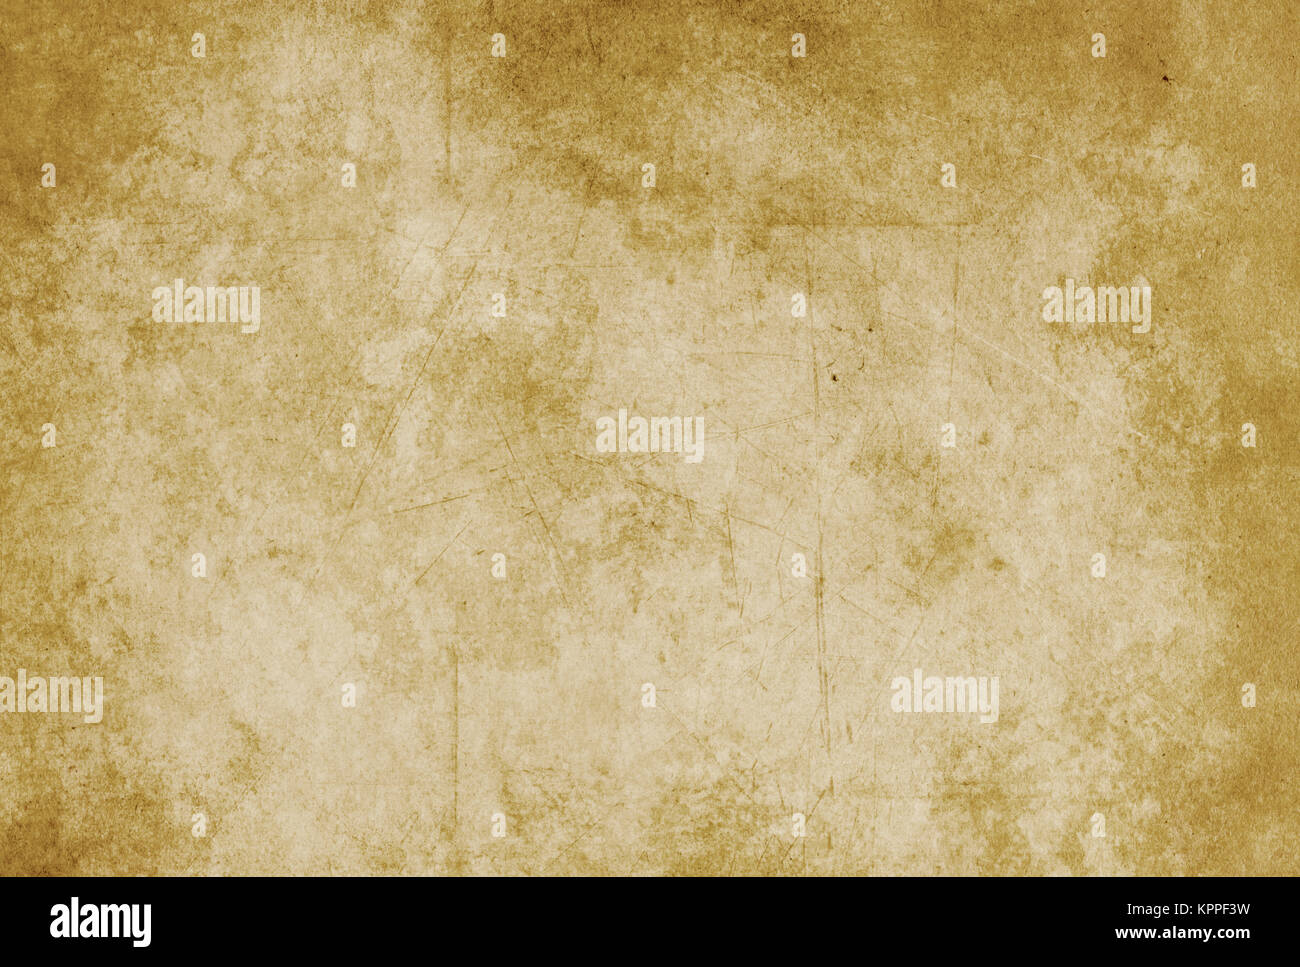 Old paper texture with grunge effect. Stock Photo